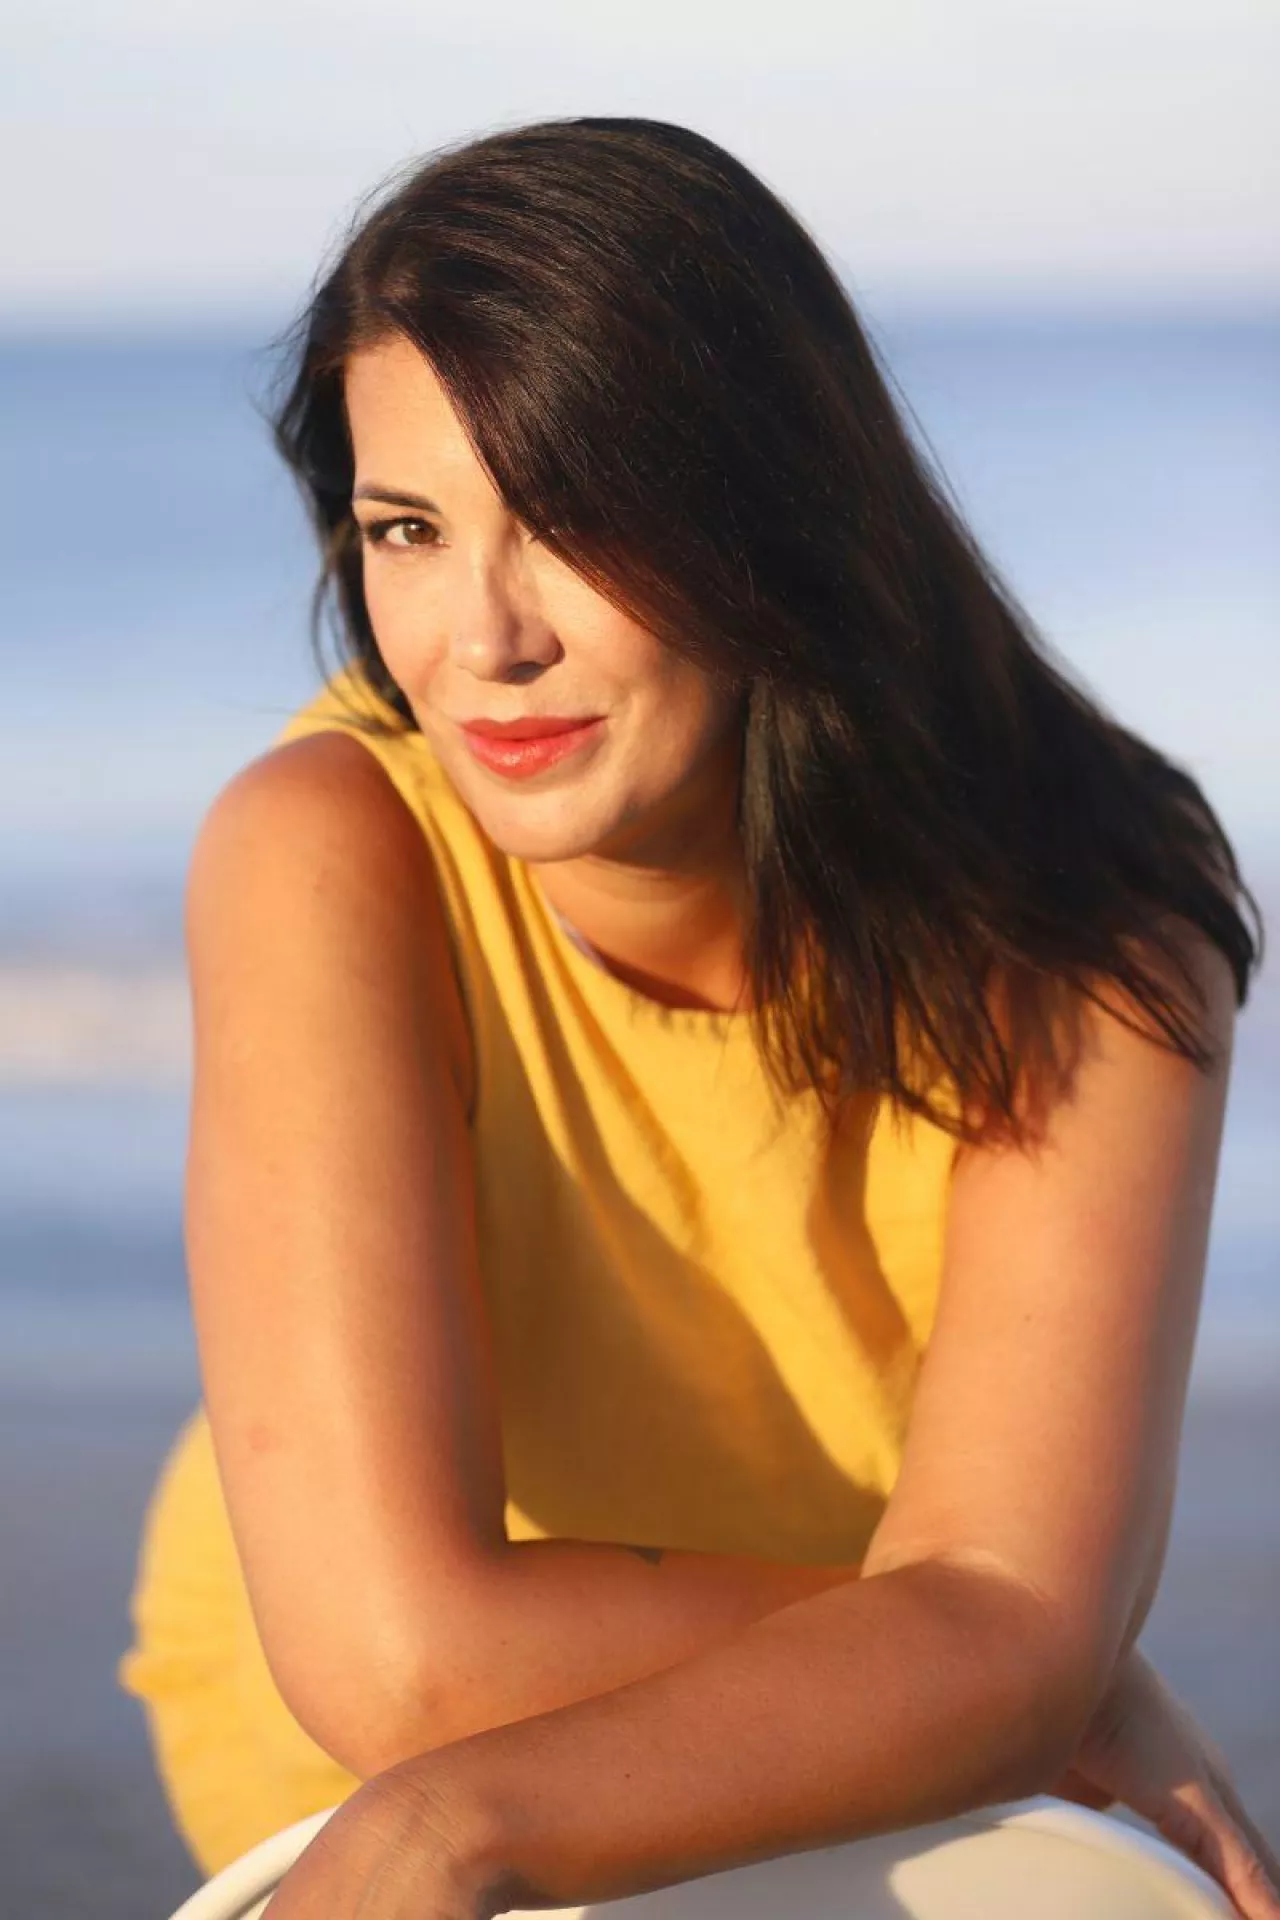 &lt;p&gt;Ines Rosa, Founder &amp; CEO of Sense and Body&lt;/p&gt;